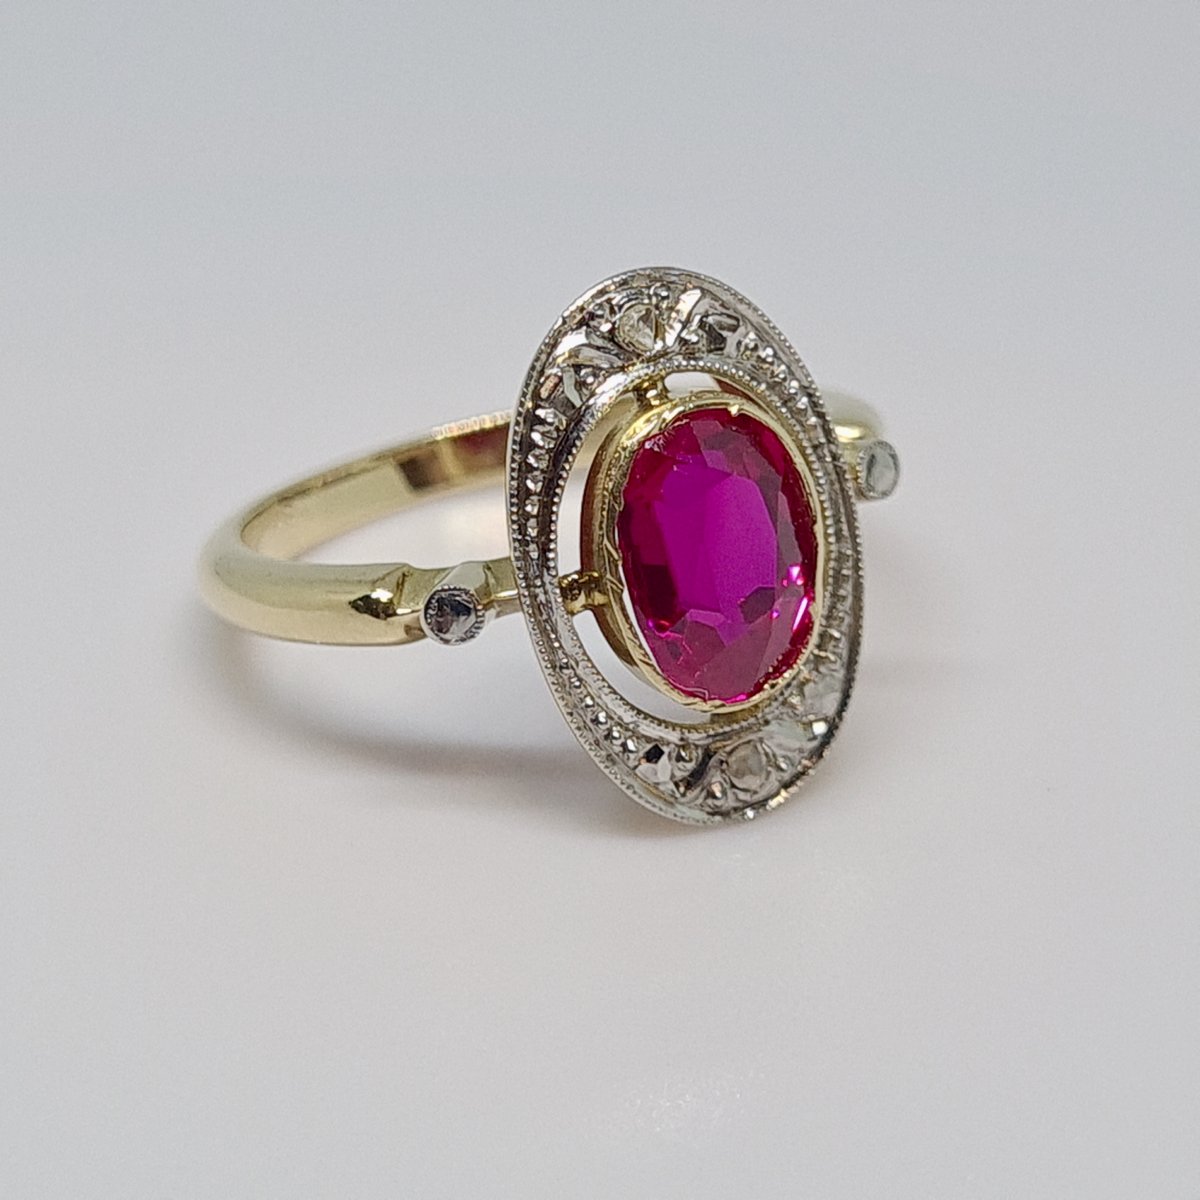 Old Synthetic Ruby Ring 1.60 Carat In 18k Yellow Gold 3.64 Grams-photo-4